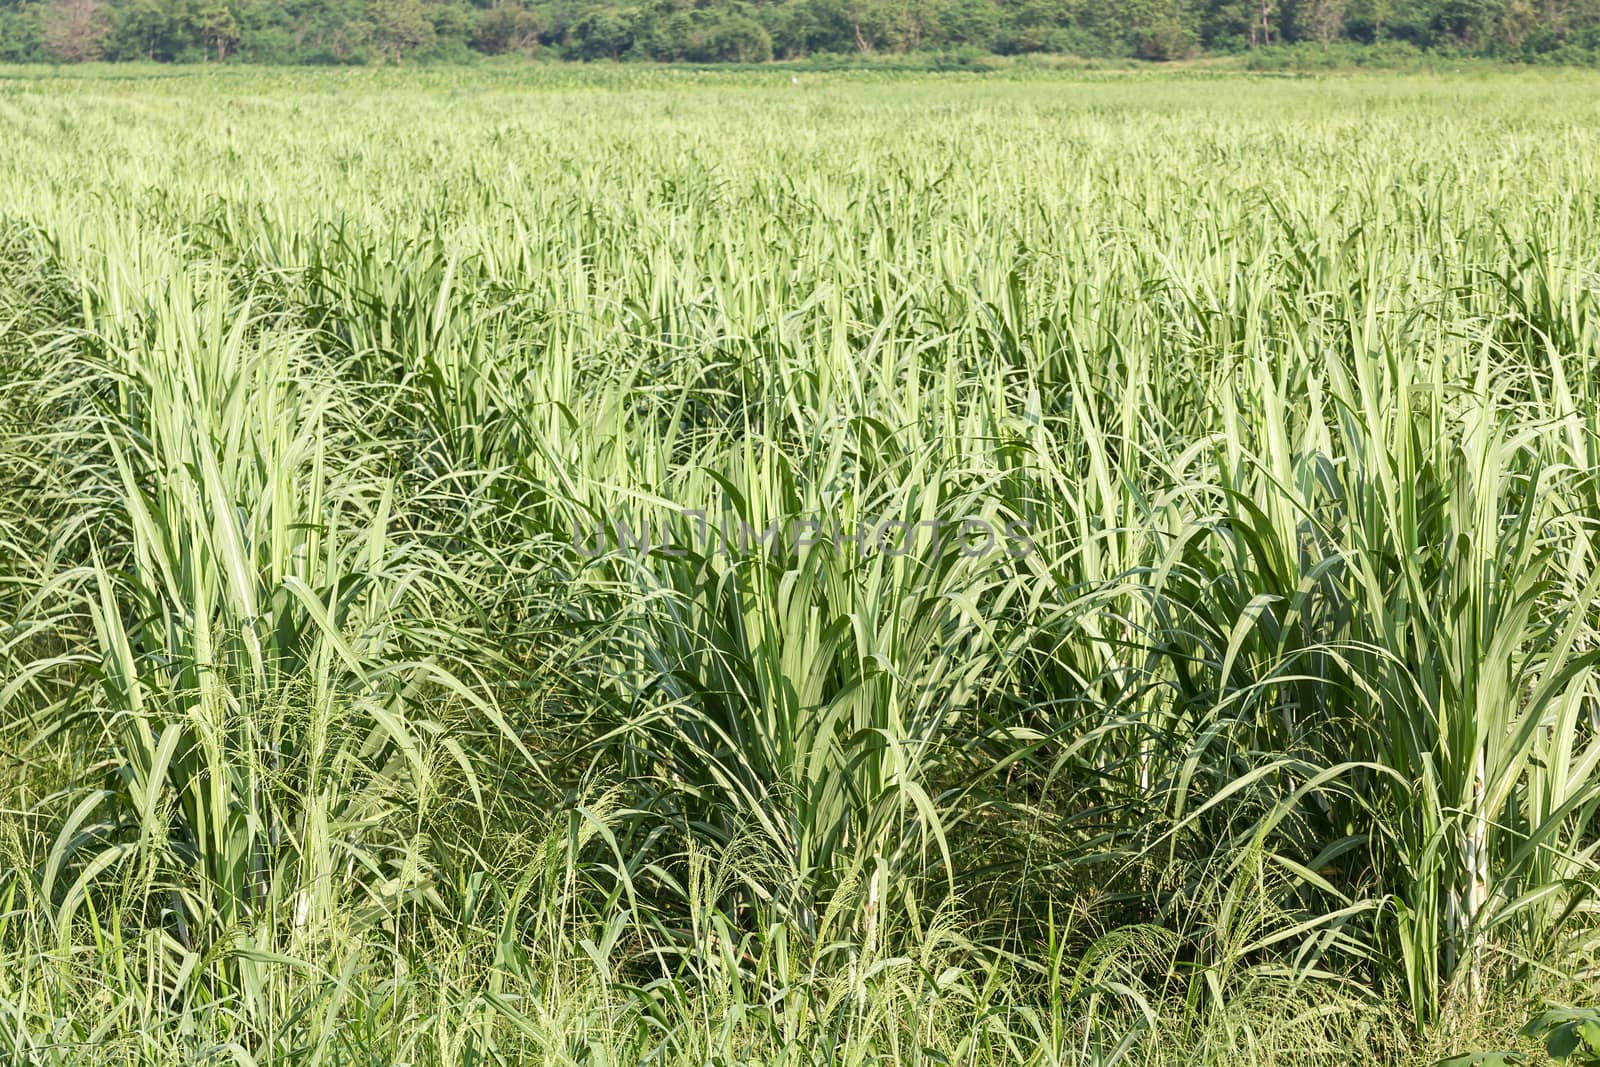 Sugarcane as early growth field in rural